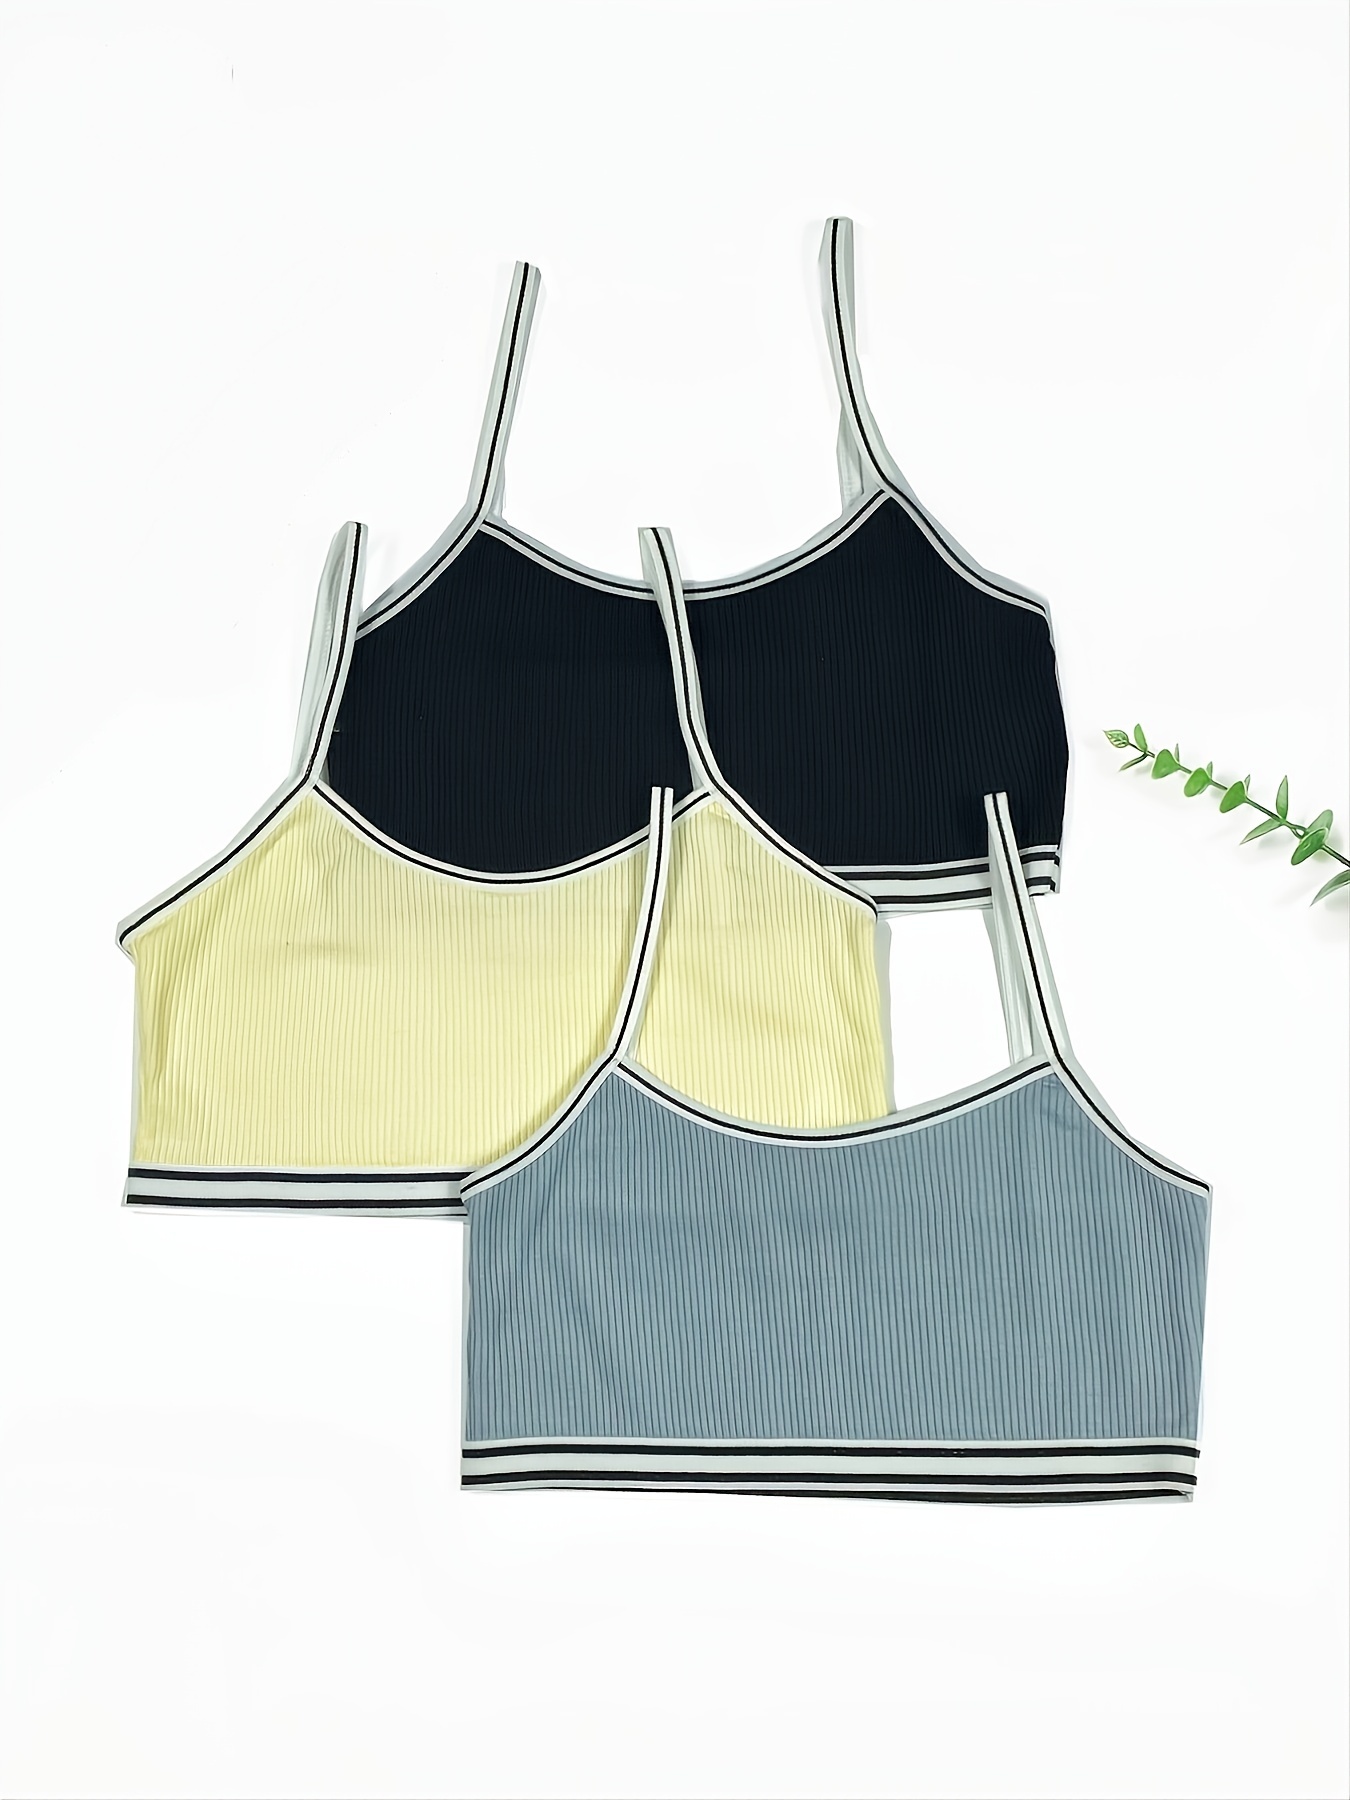 Girl's Developmental Period Underwire Bra Little Cute Pattern Solid Color  For 9-12-14 Years Old (3 Pieces Set)